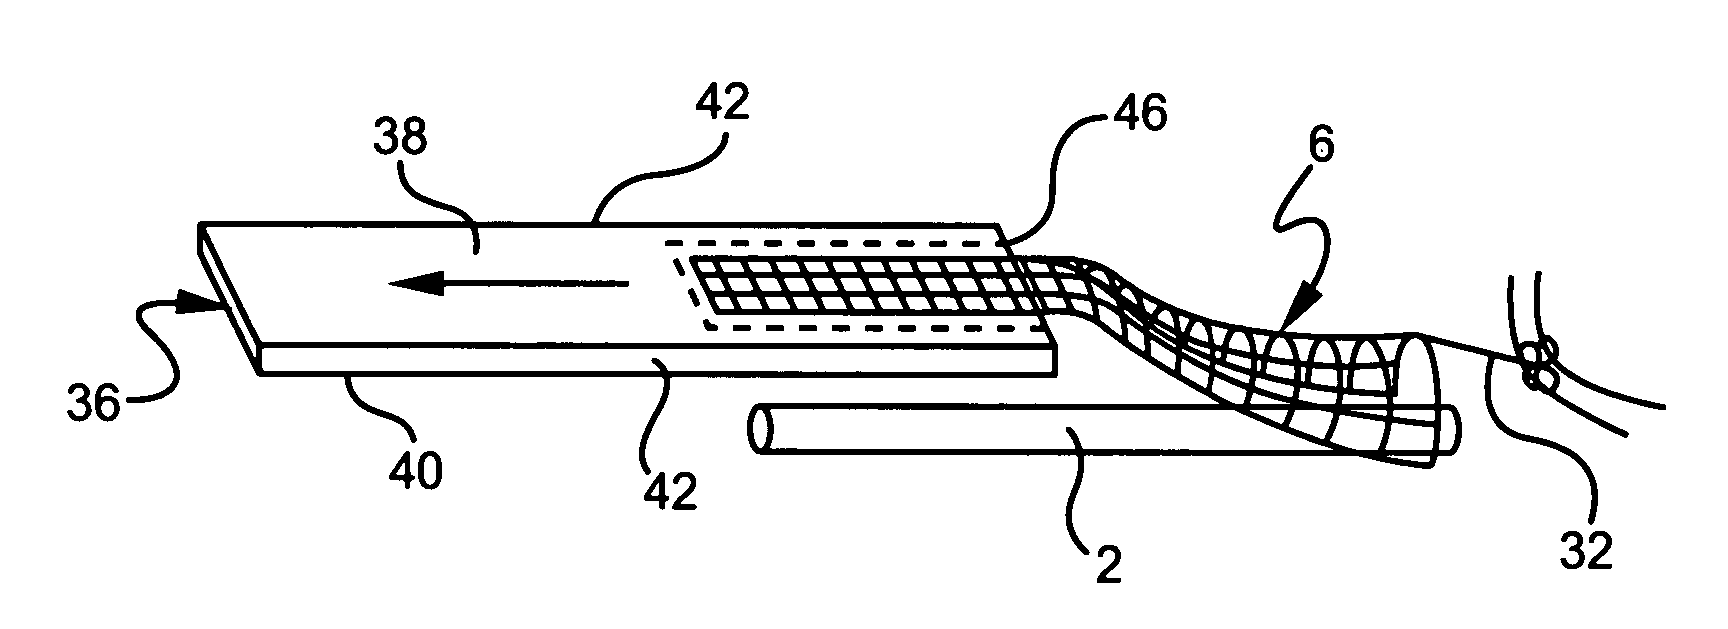 Device for treating carpal tunnel syndrome